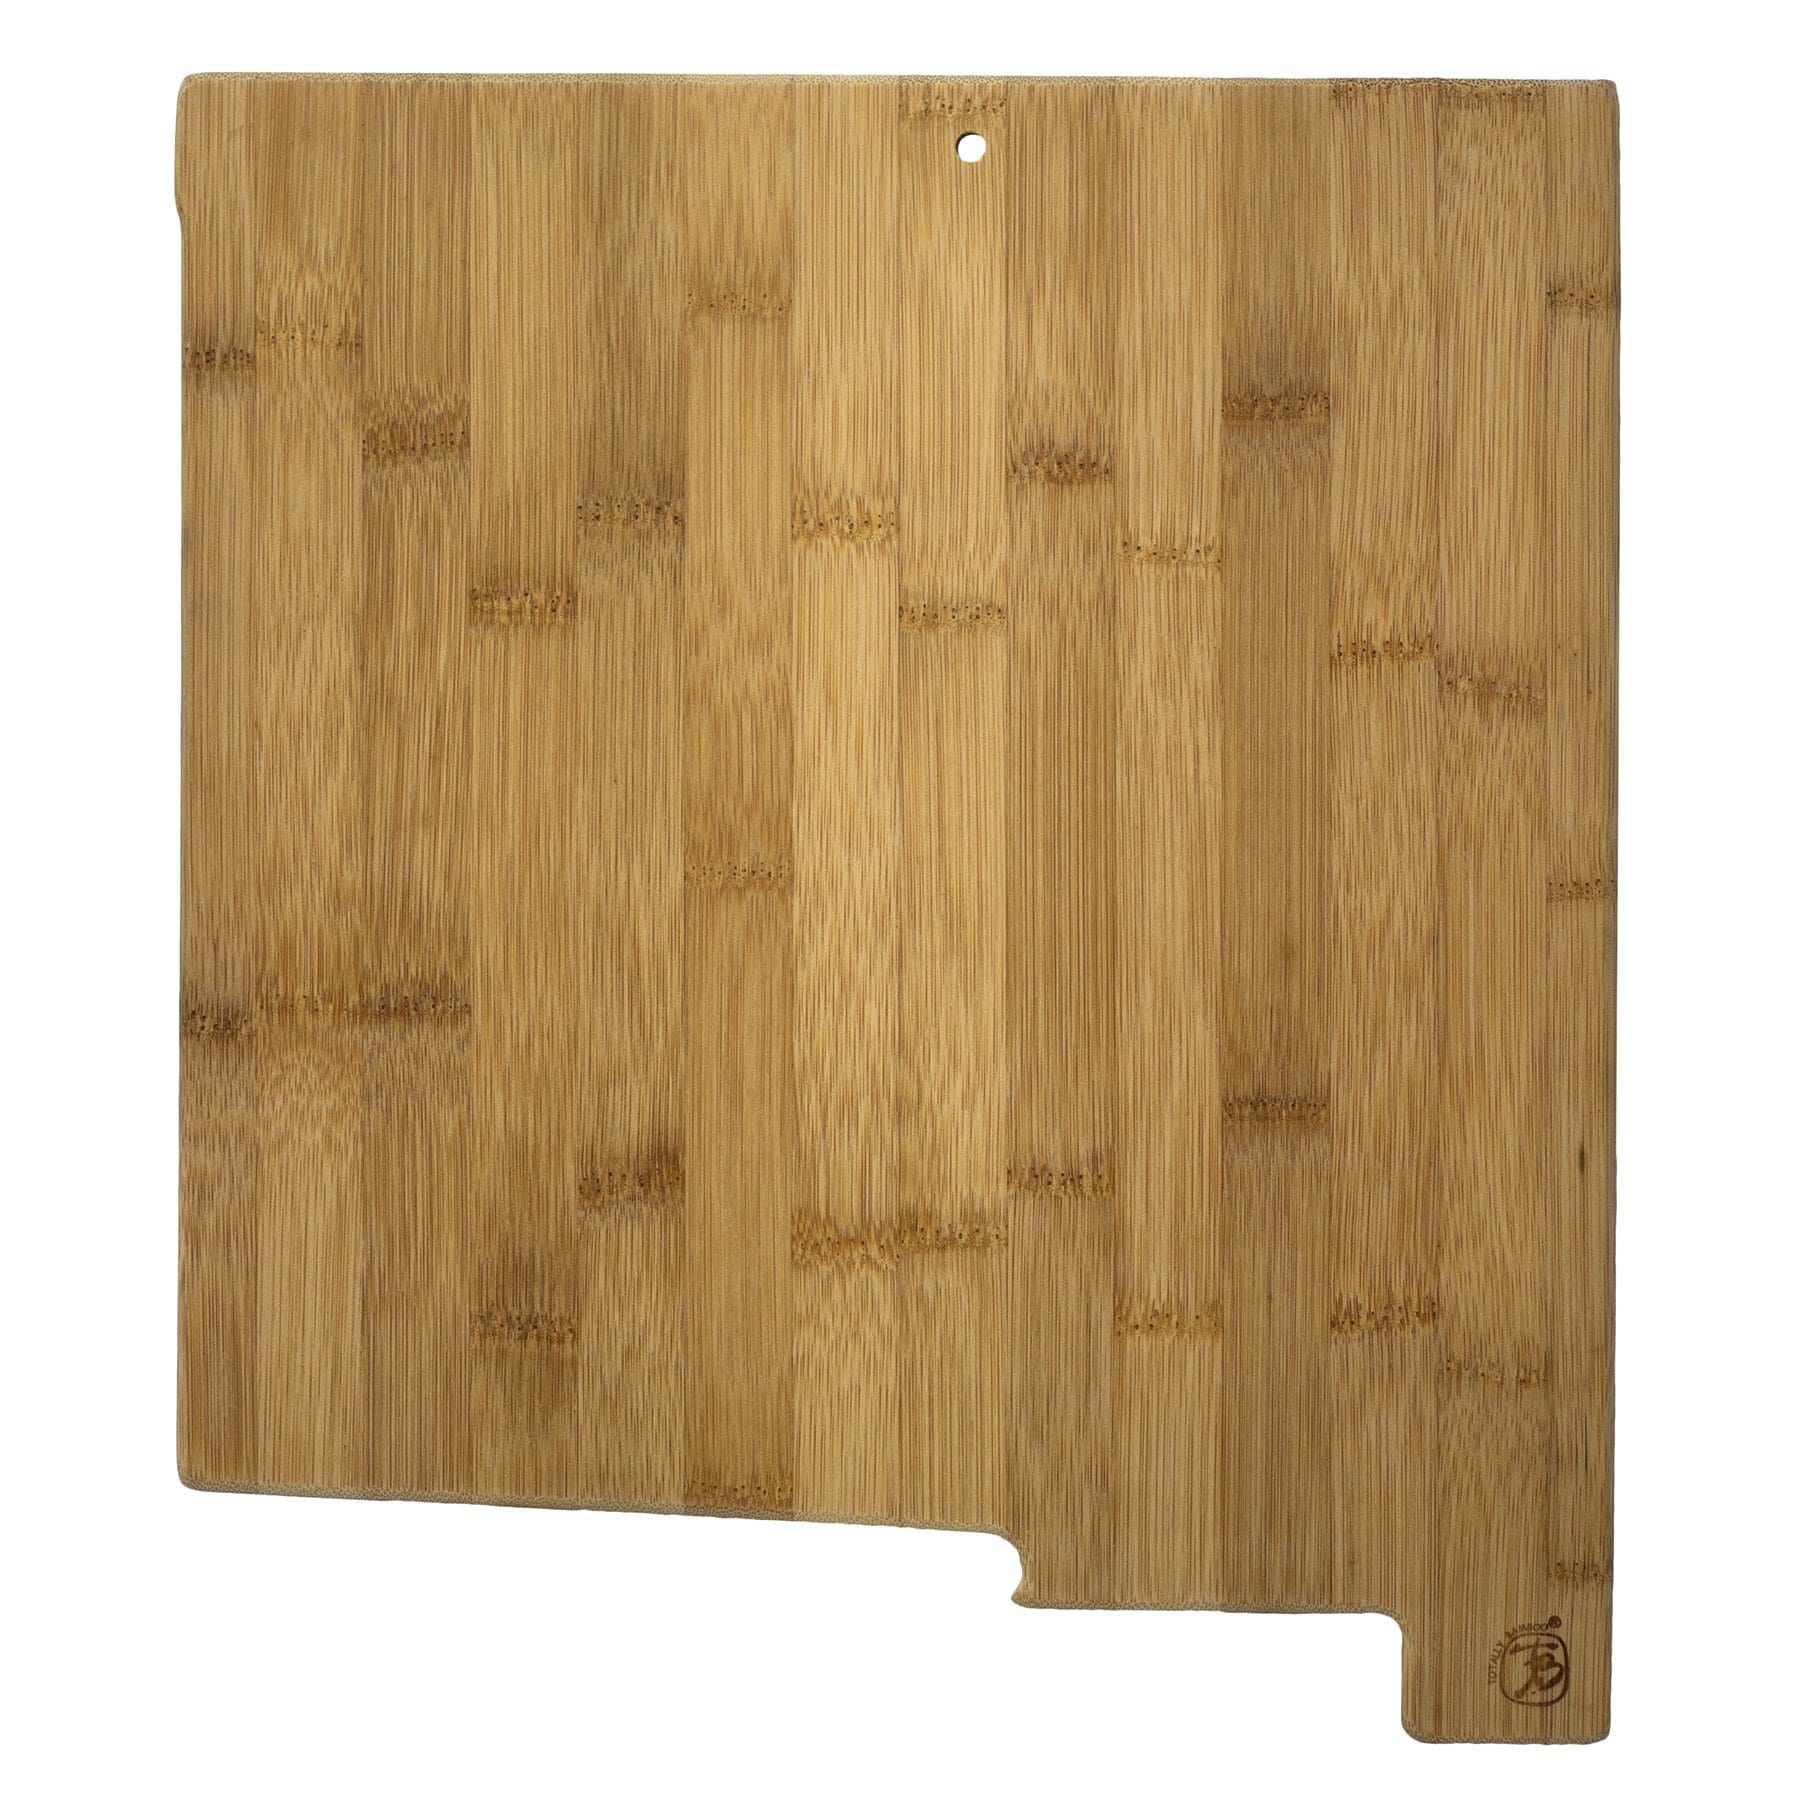 Totally Bamboo New Mexico State Shaped Bamboo Serving and Cutting Board